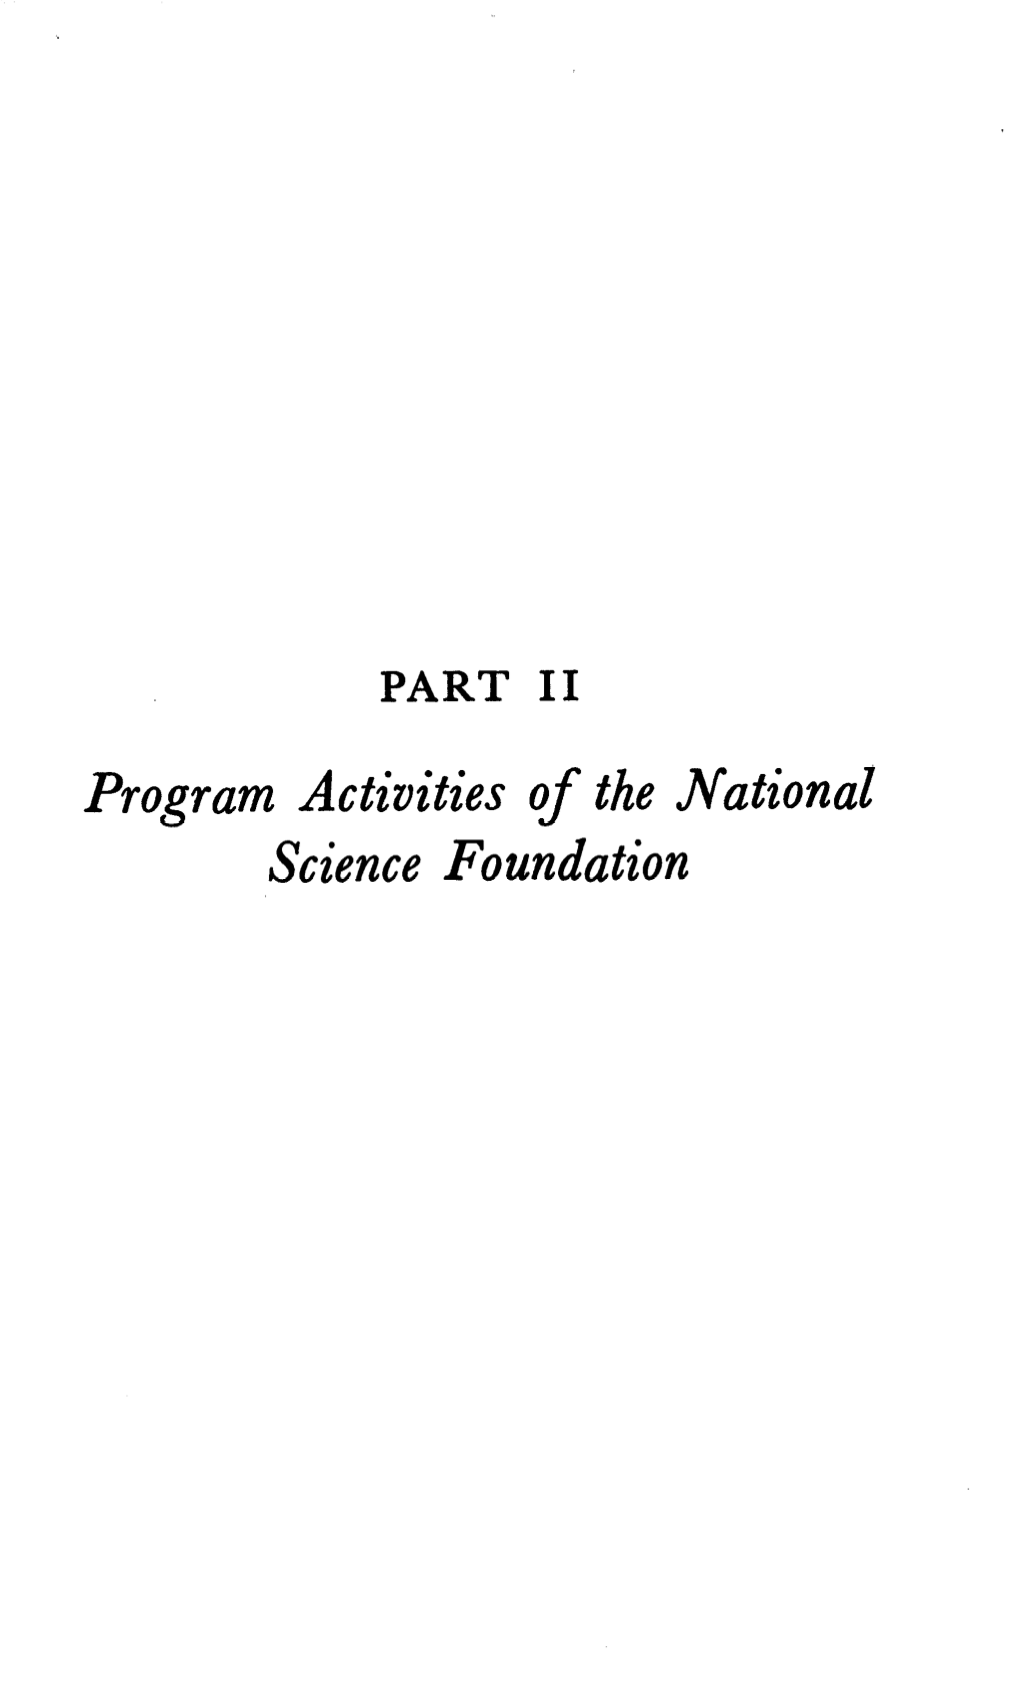 Program Activities of the National Science Foundation